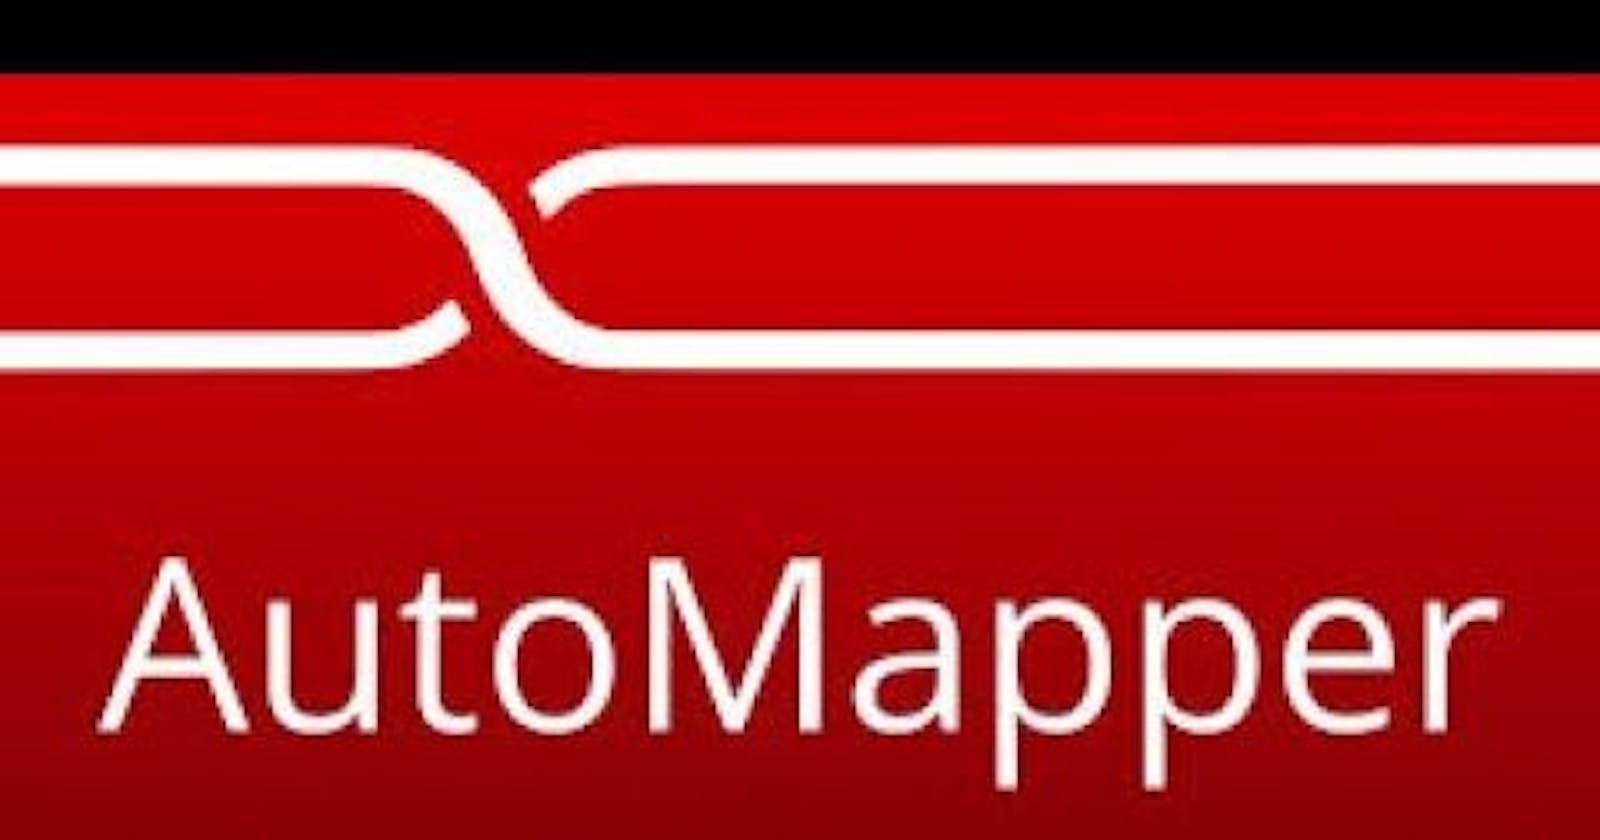 Customize your Mapping in AutoMapper